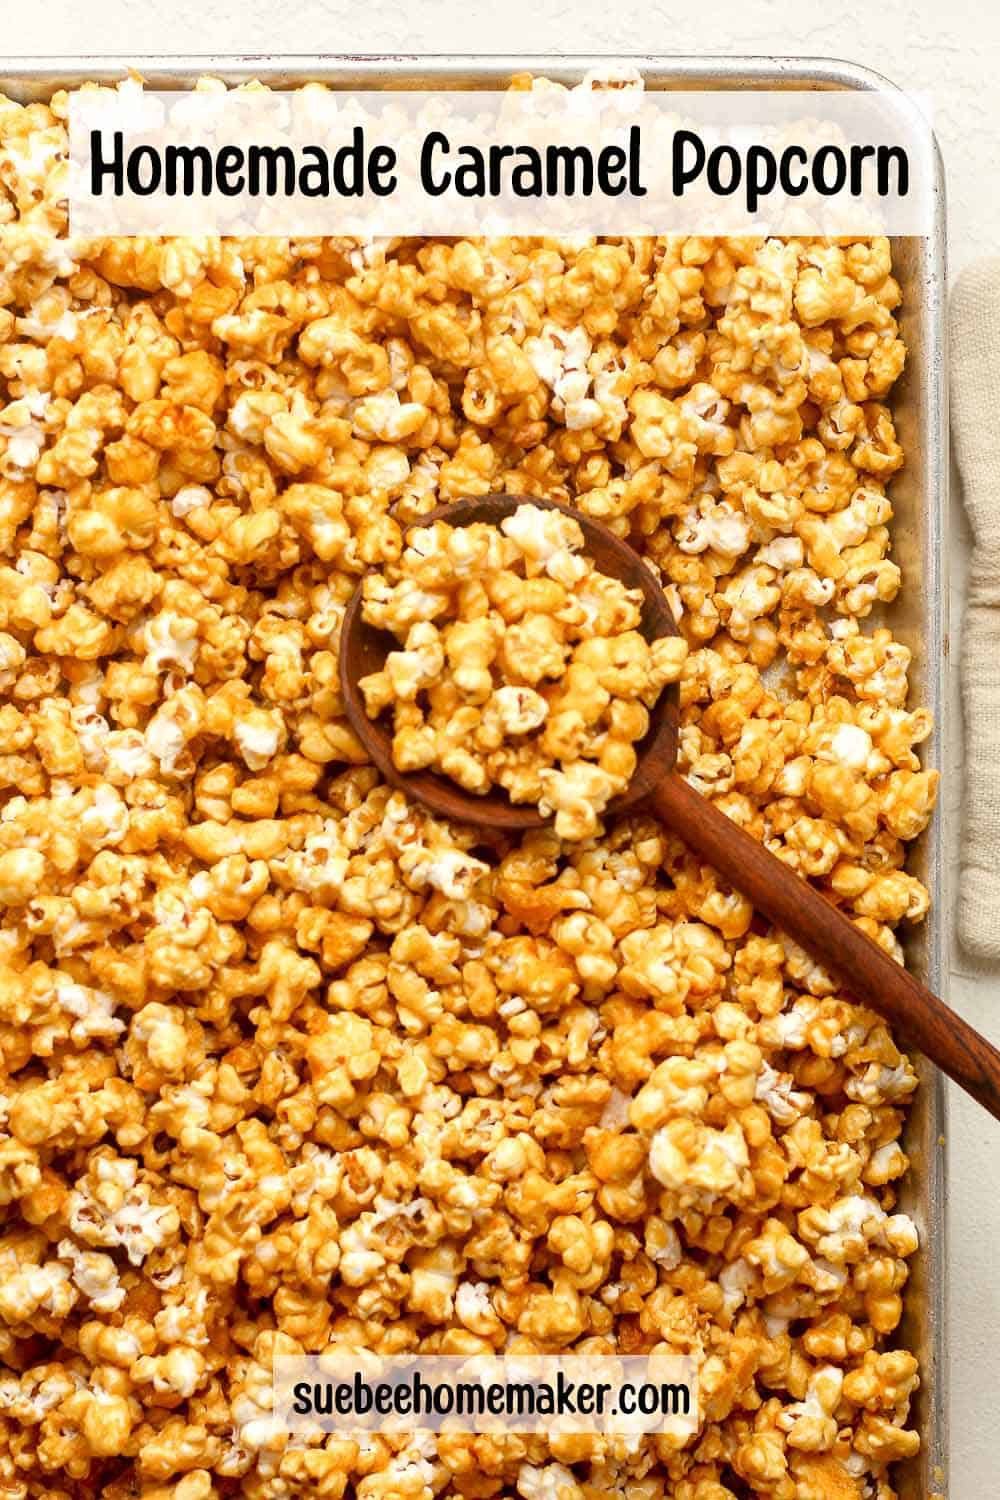 Overhead view of a pan of homemade caramel popcorn with a spoon.